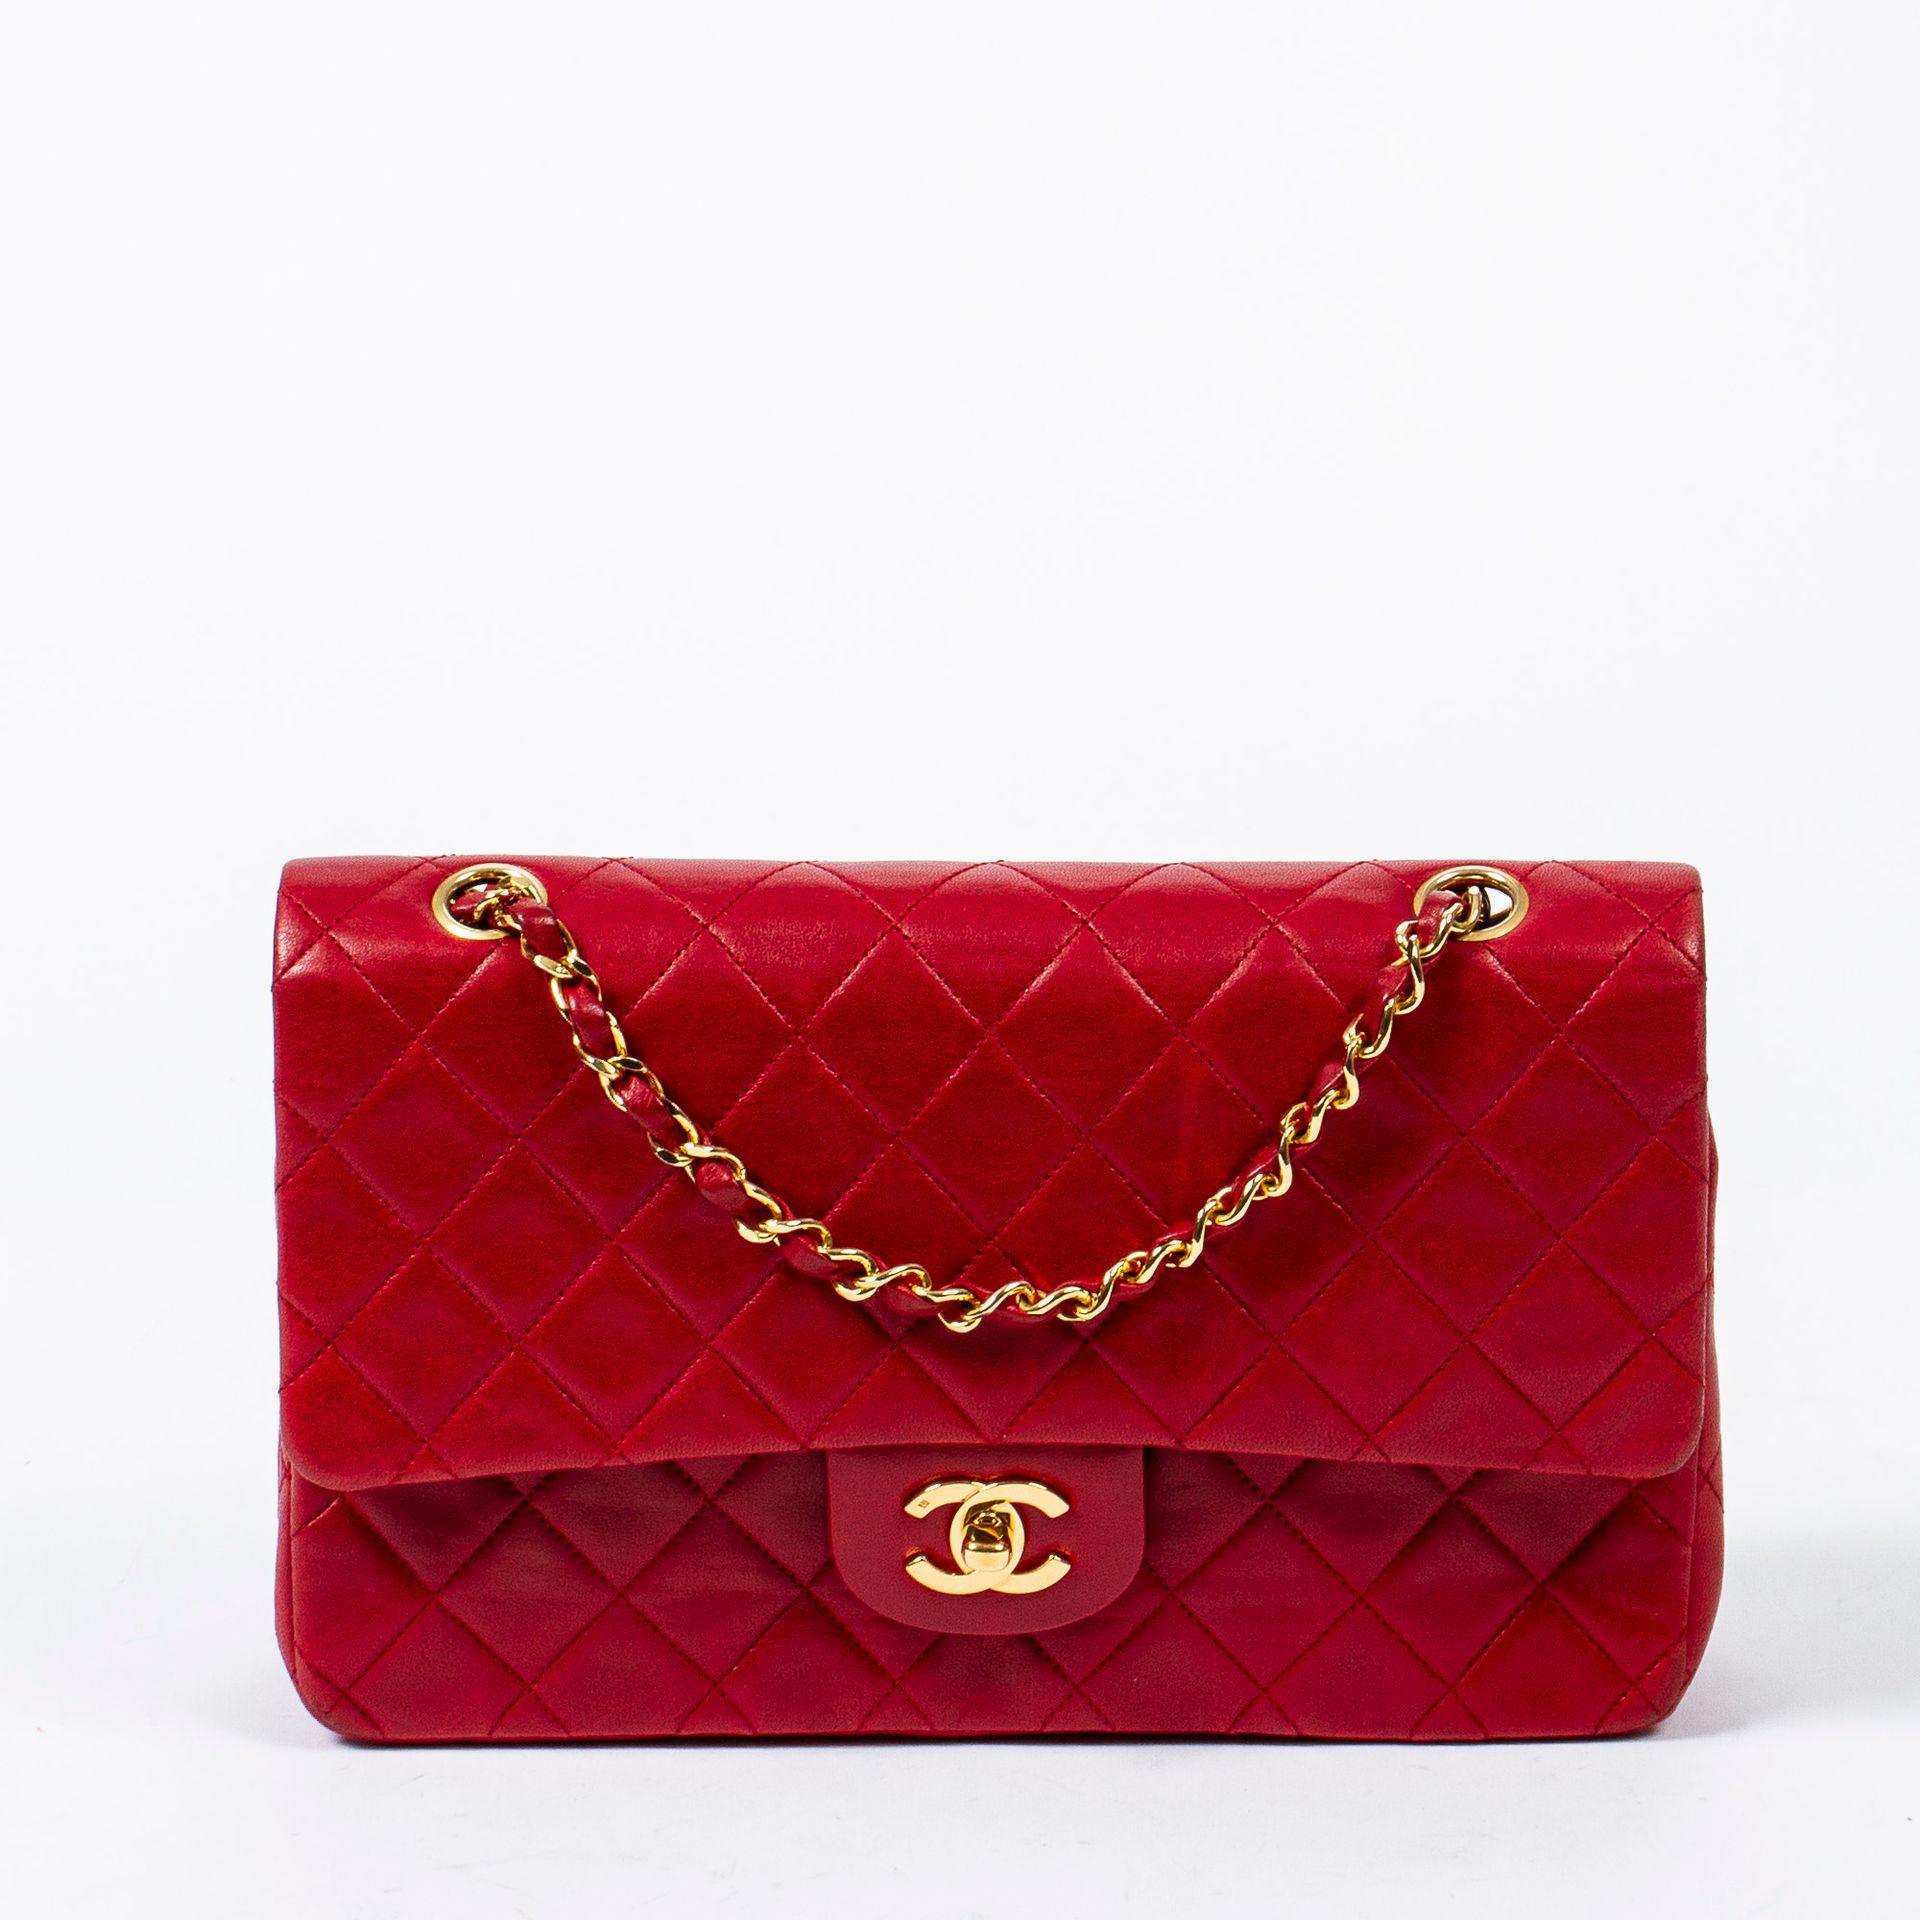 buy new chanel bag authentic